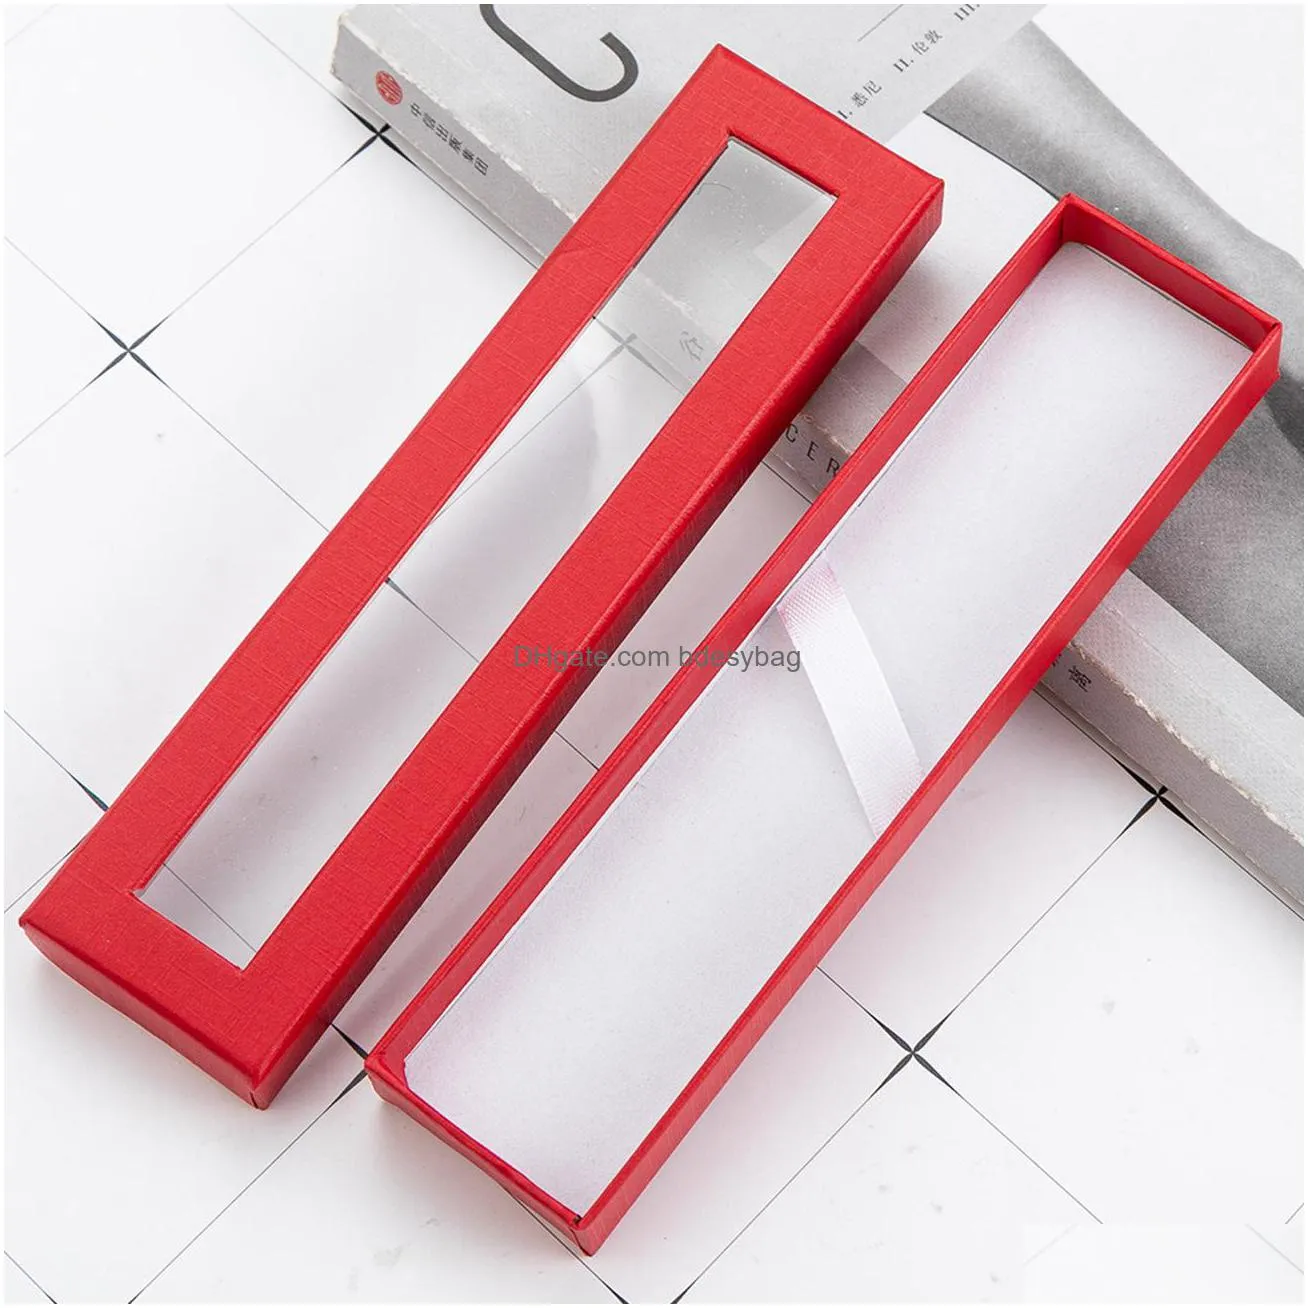 pen box paper boxes general creative gift packaging cardboard box carton paper box with plastic pvc window lx0515